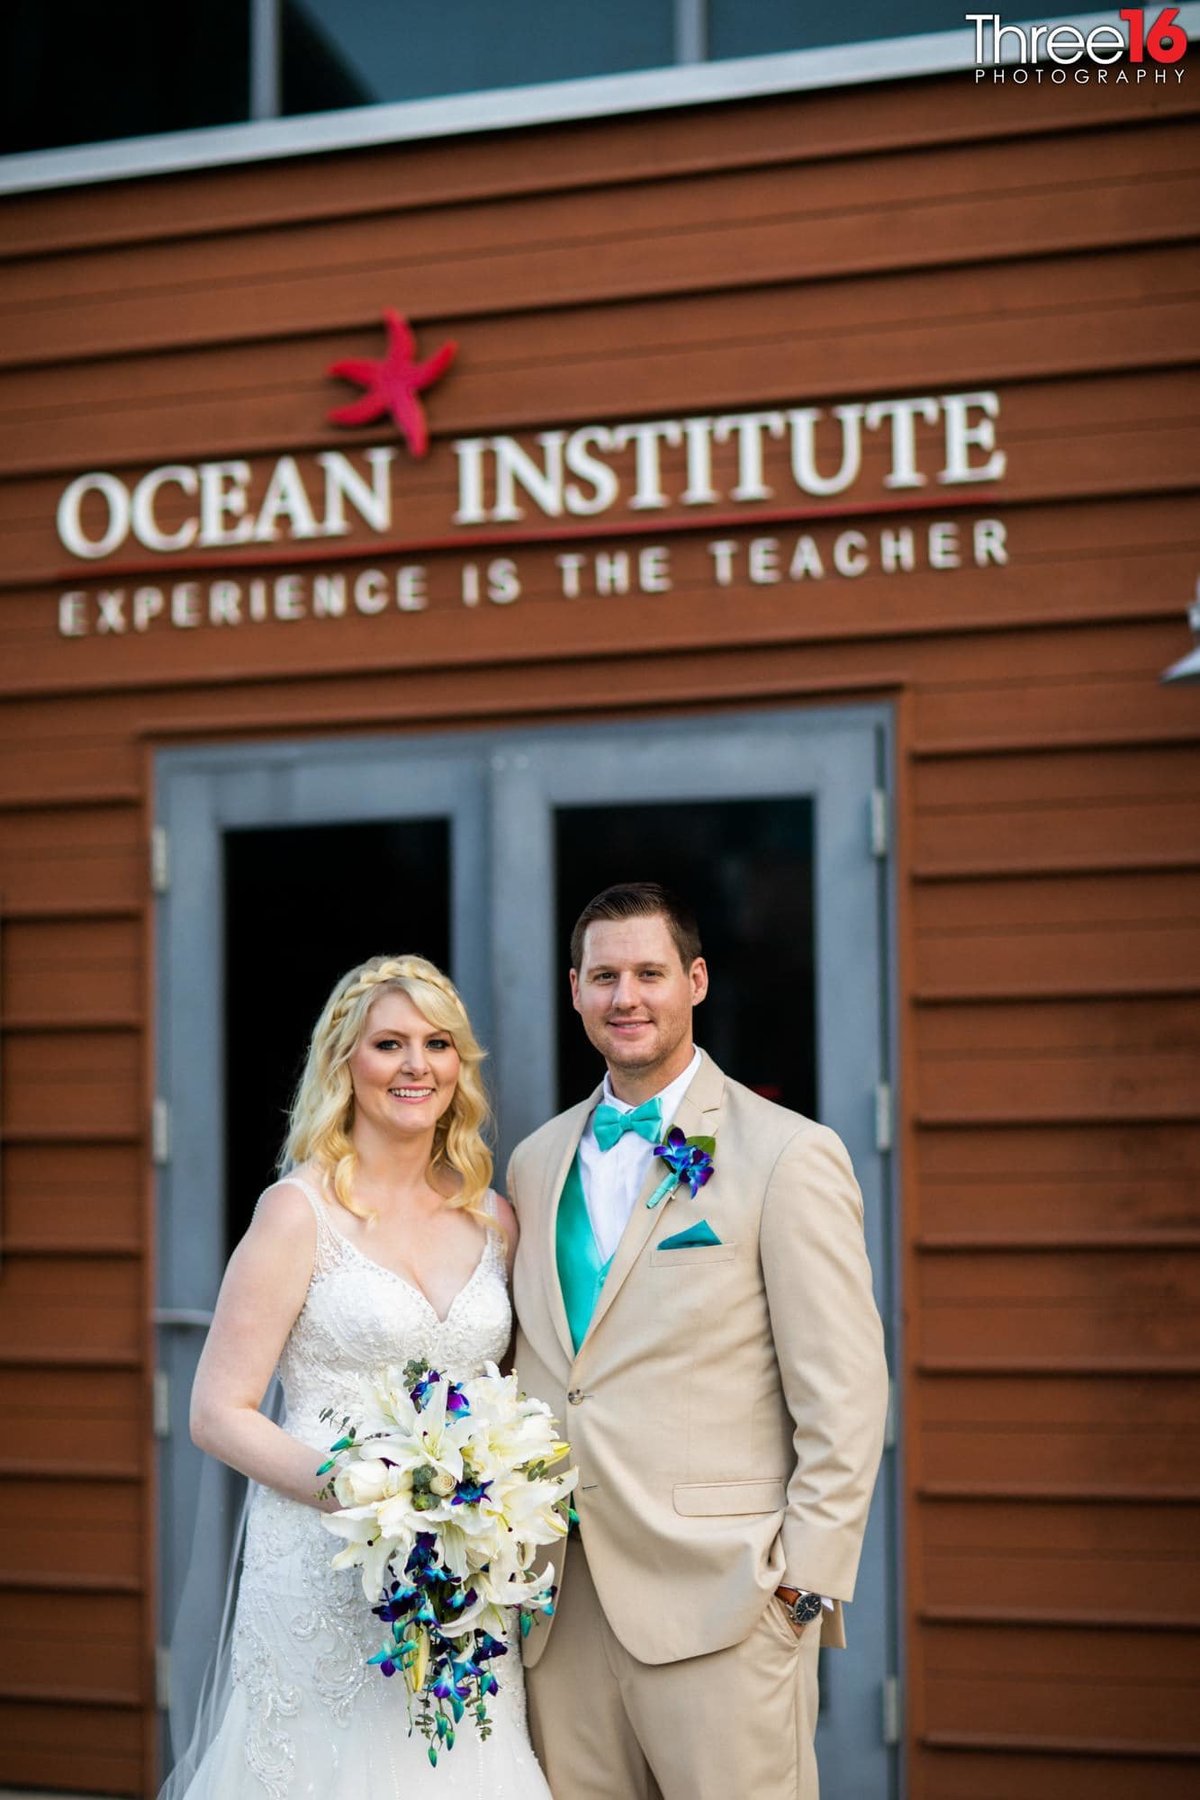 Bride and Groom pose for photos in front of the Ocean Institute wedding venue